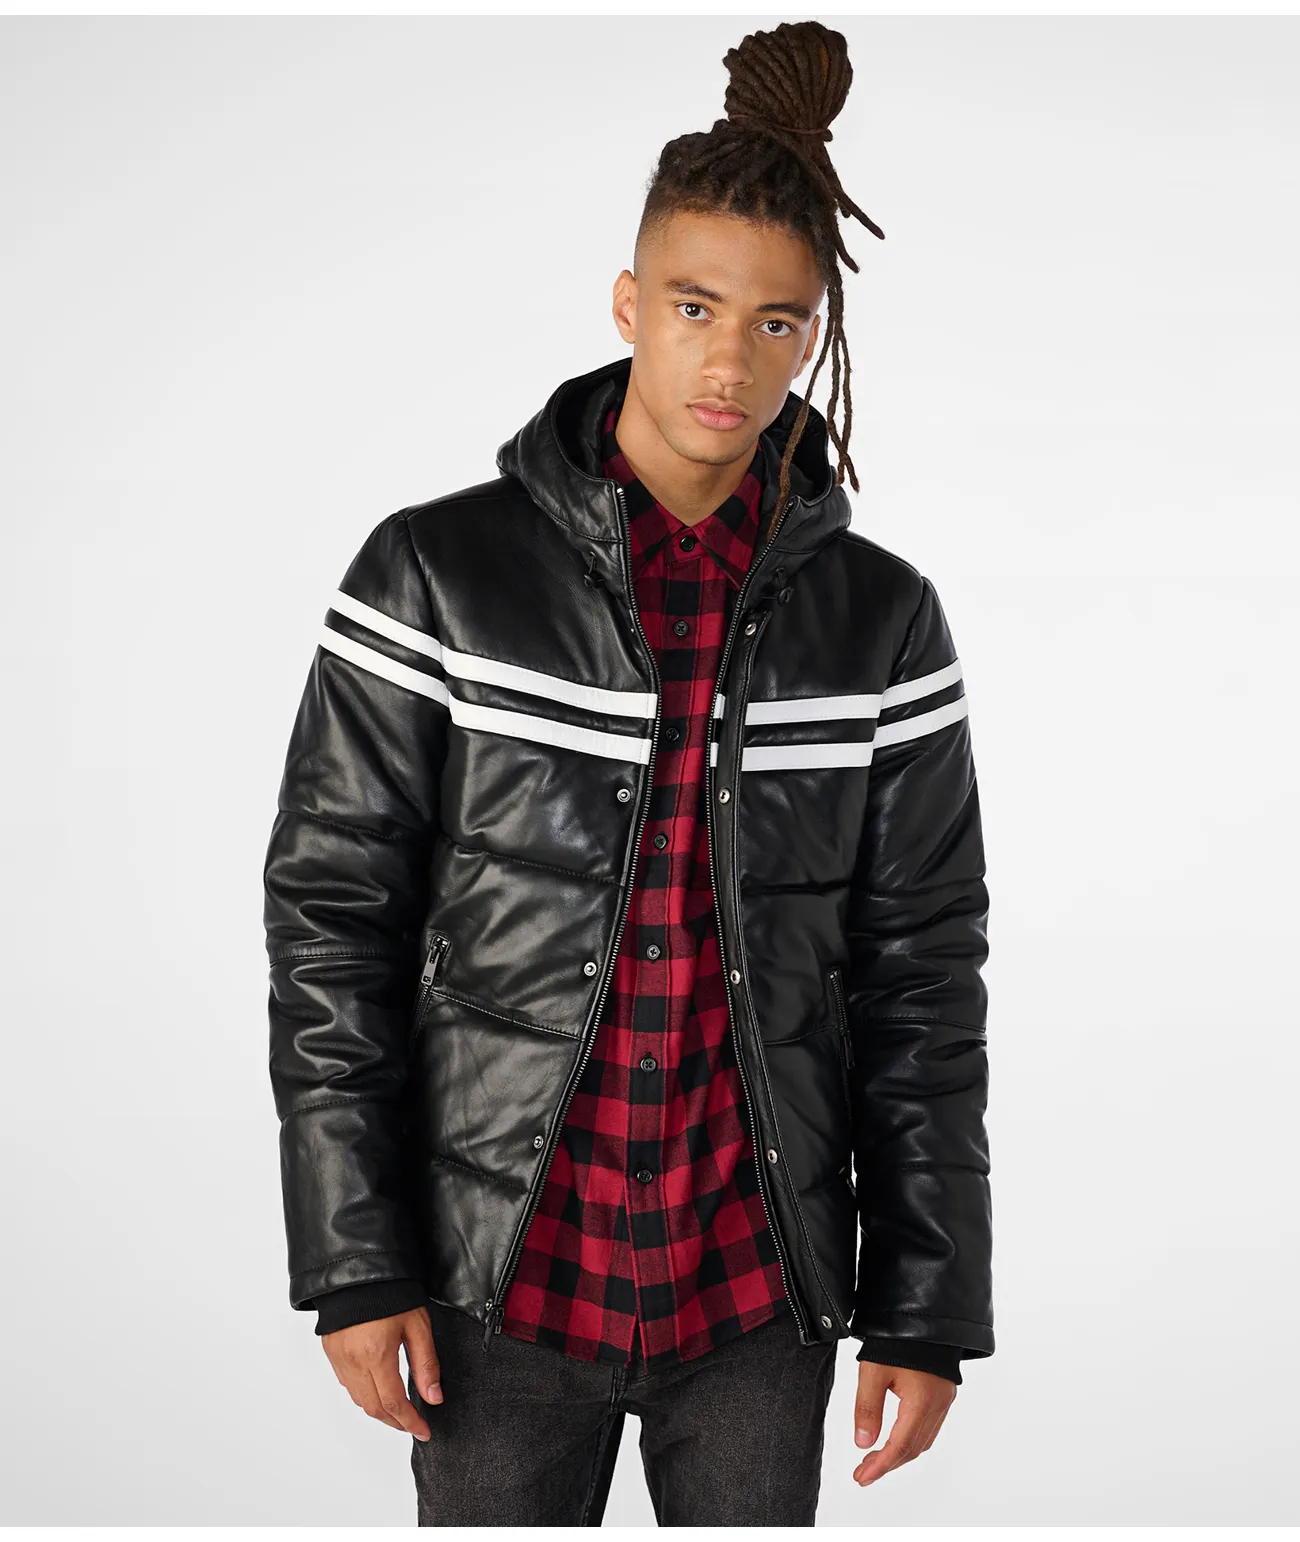 Hooded Puffer Leather Jacket With Stripes